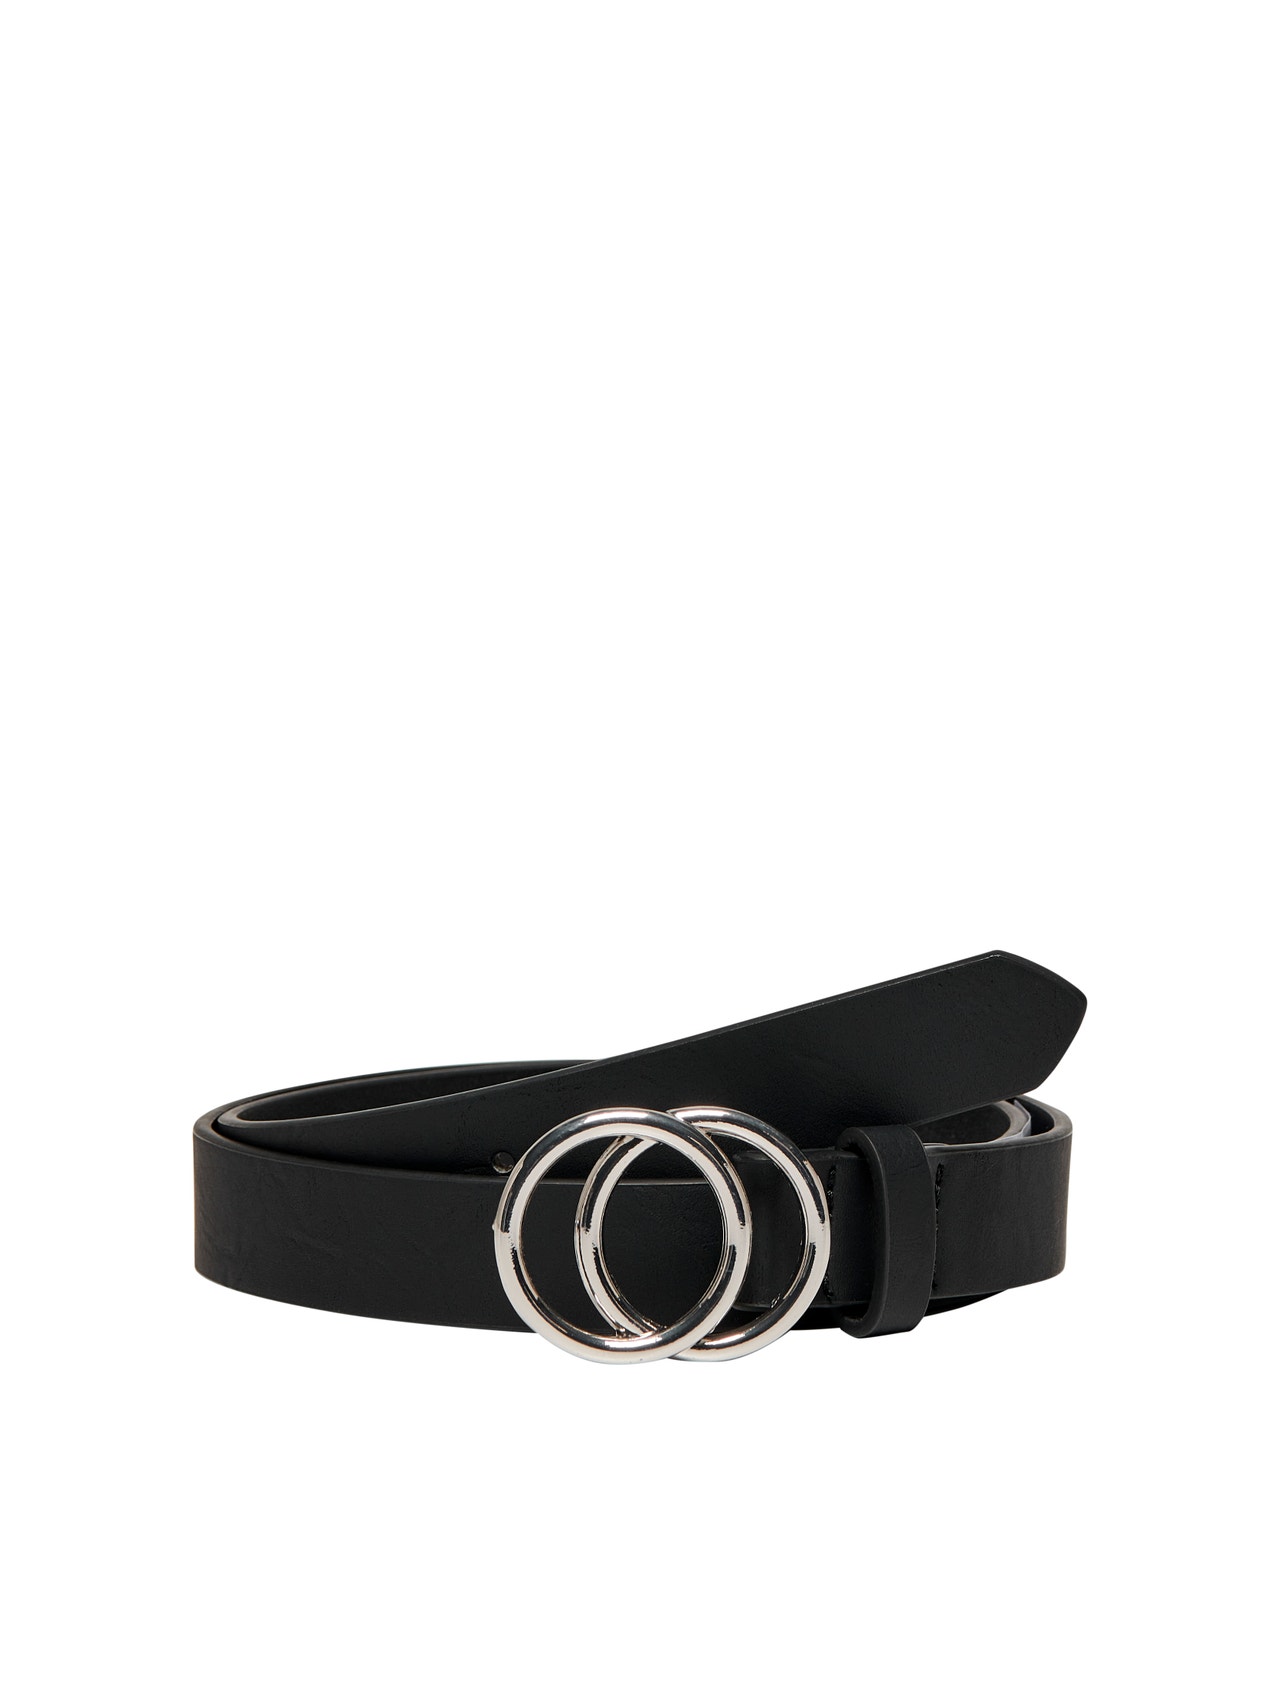 ONLY Faux leather Belt -Black - 15185213